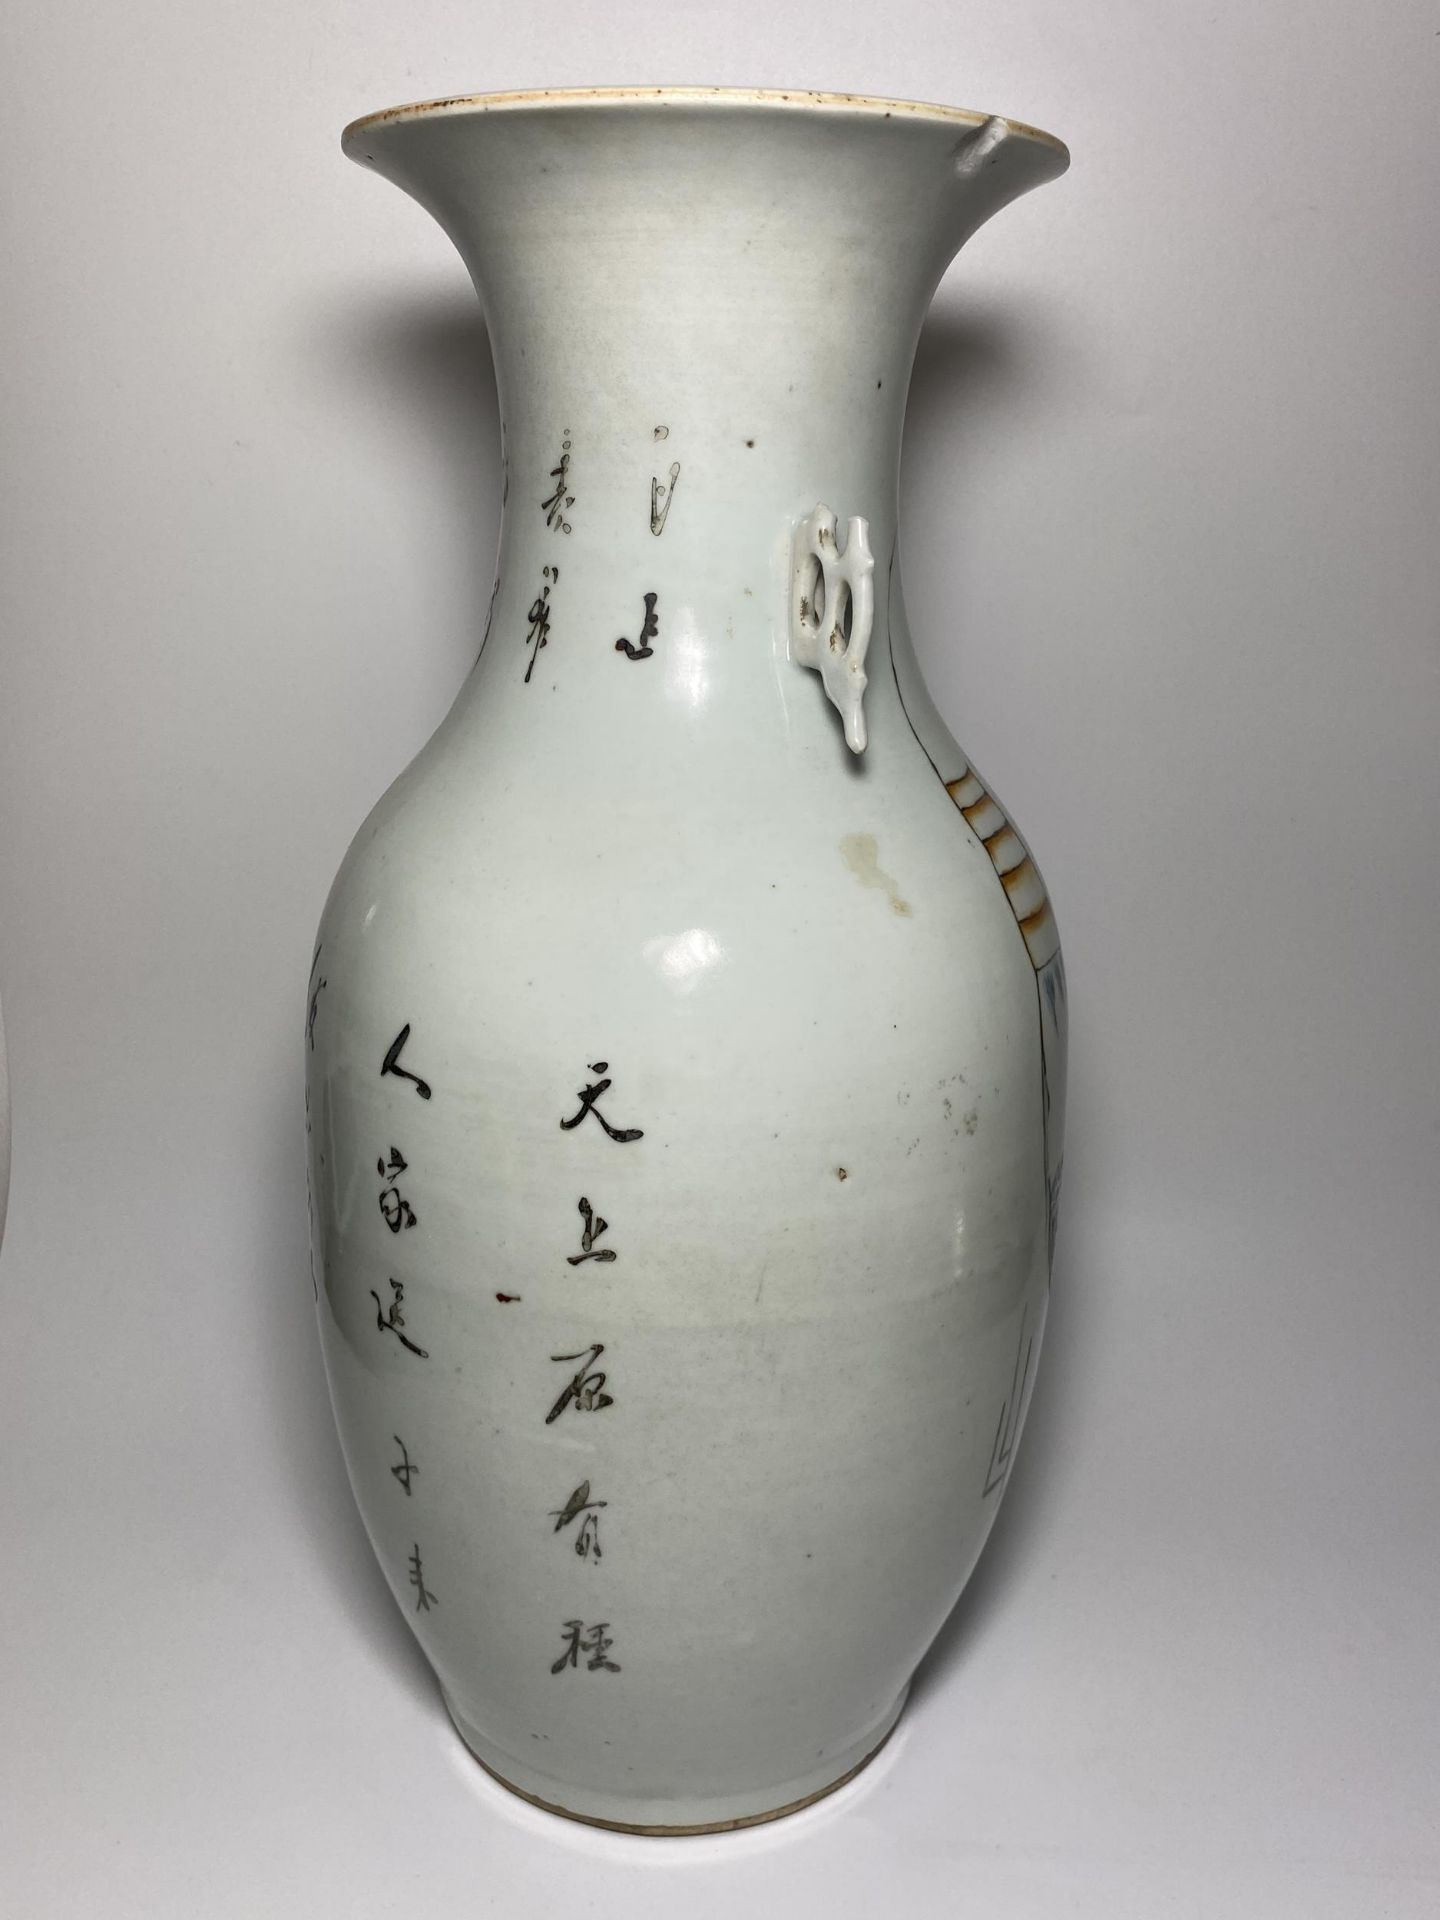 A LARGE 19TH CENTURY CHINESE QING PORCELAIN VASE WITH FIGURAL & CALLIGRAPHY DESIGN, HEIGHT 43CM - Image 7 of 11